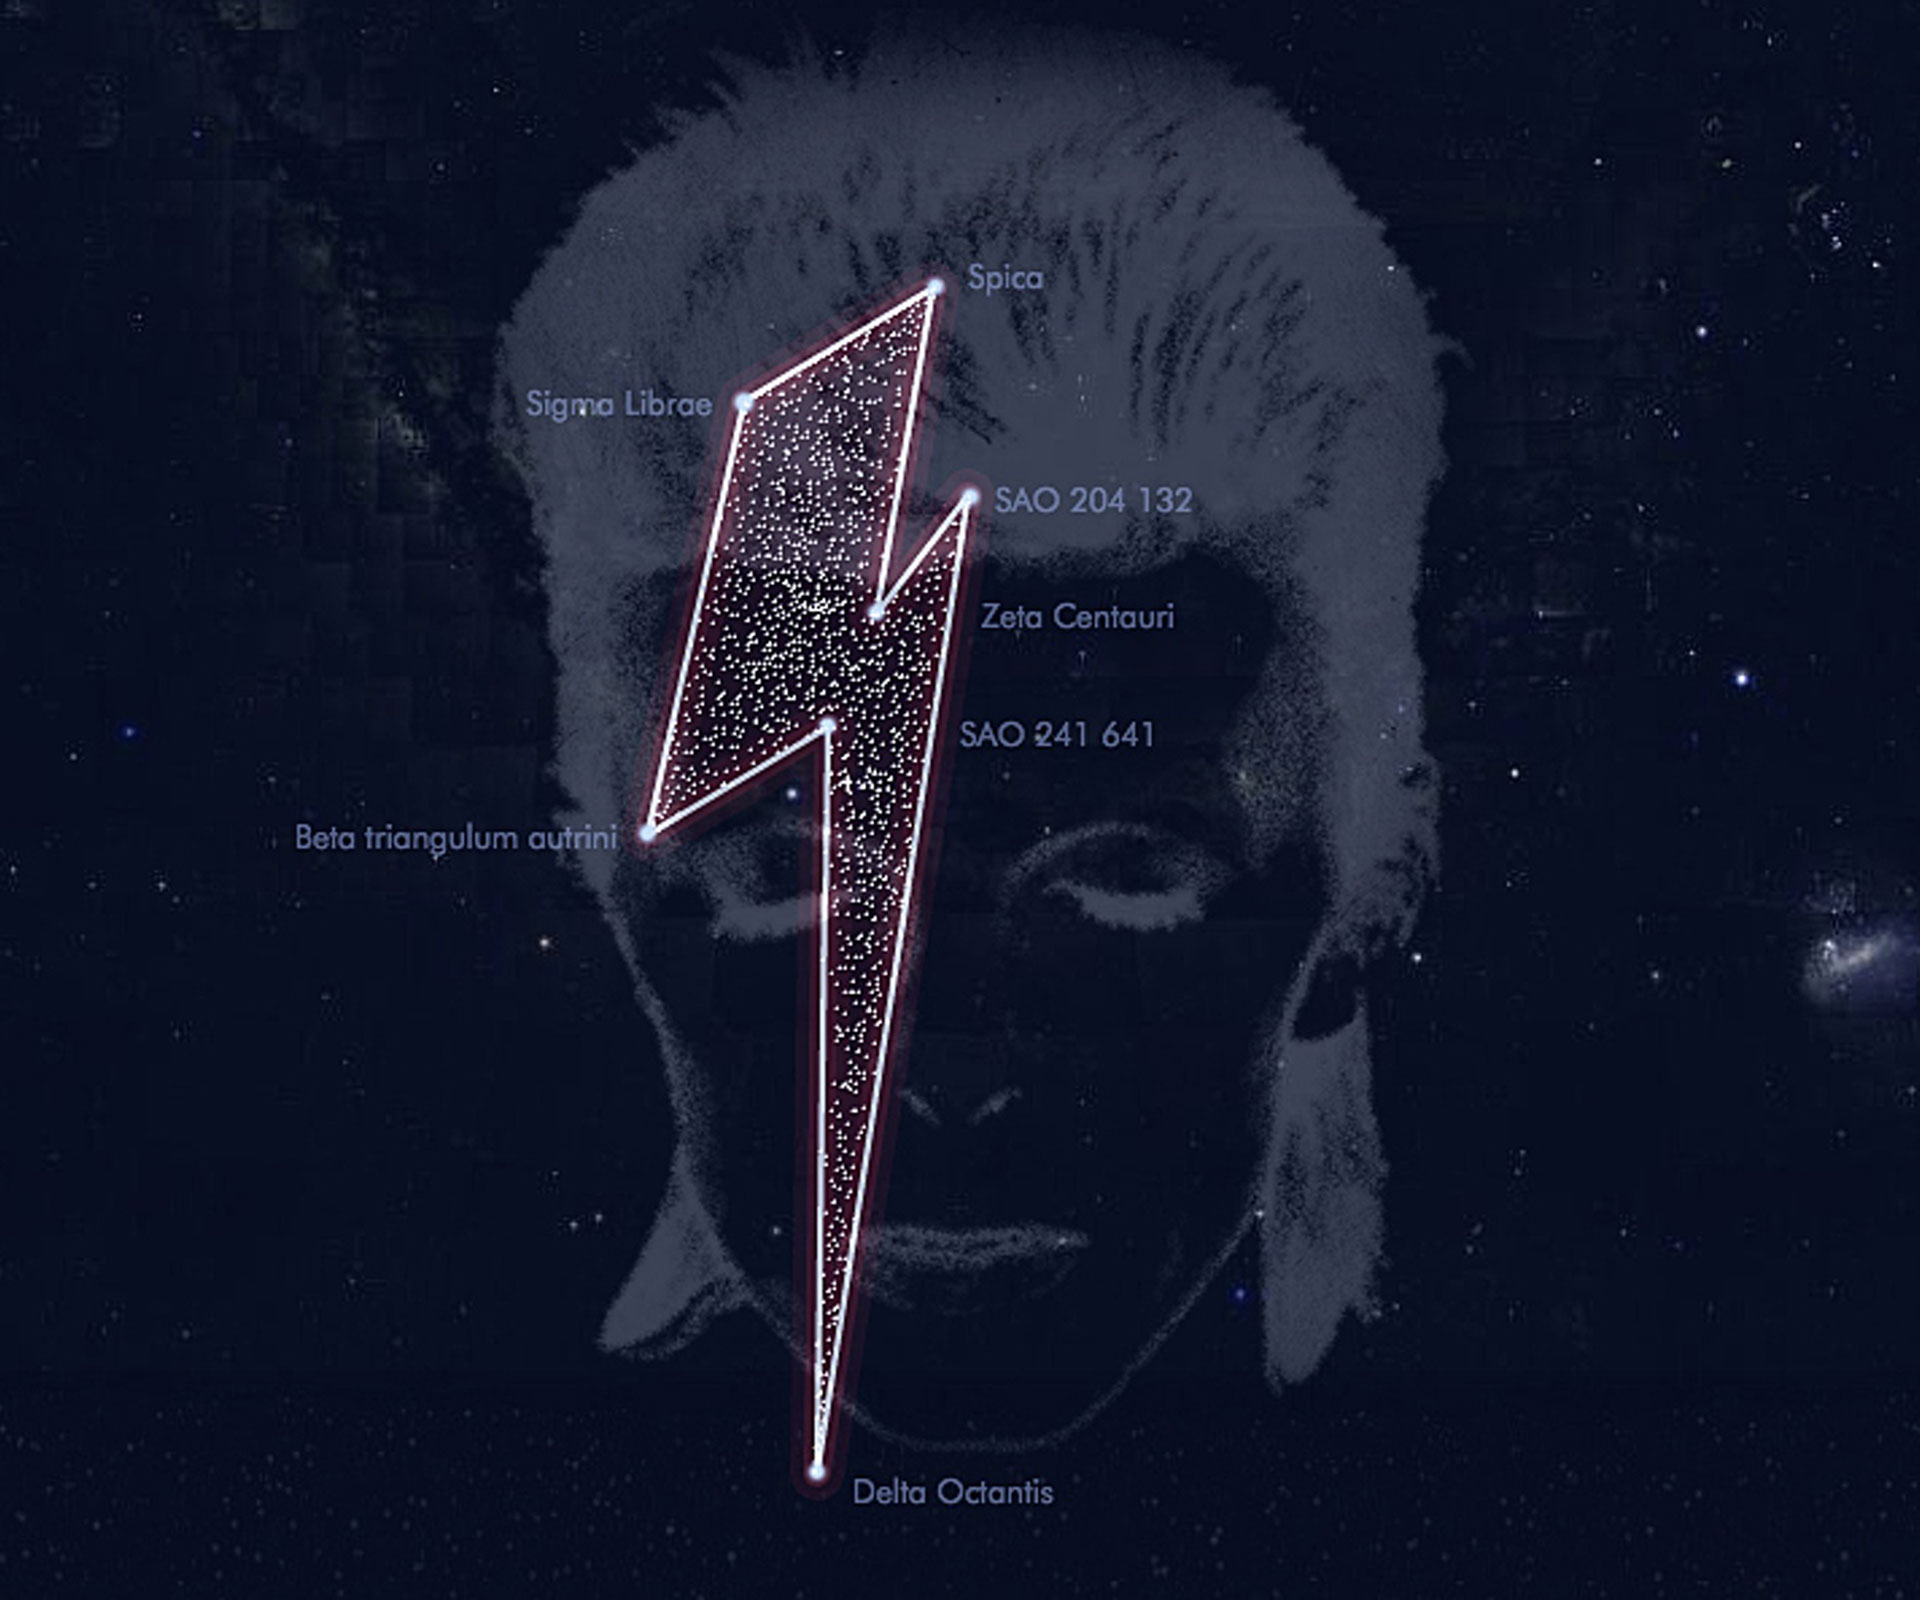 Starman David Bowie gets his own constellation